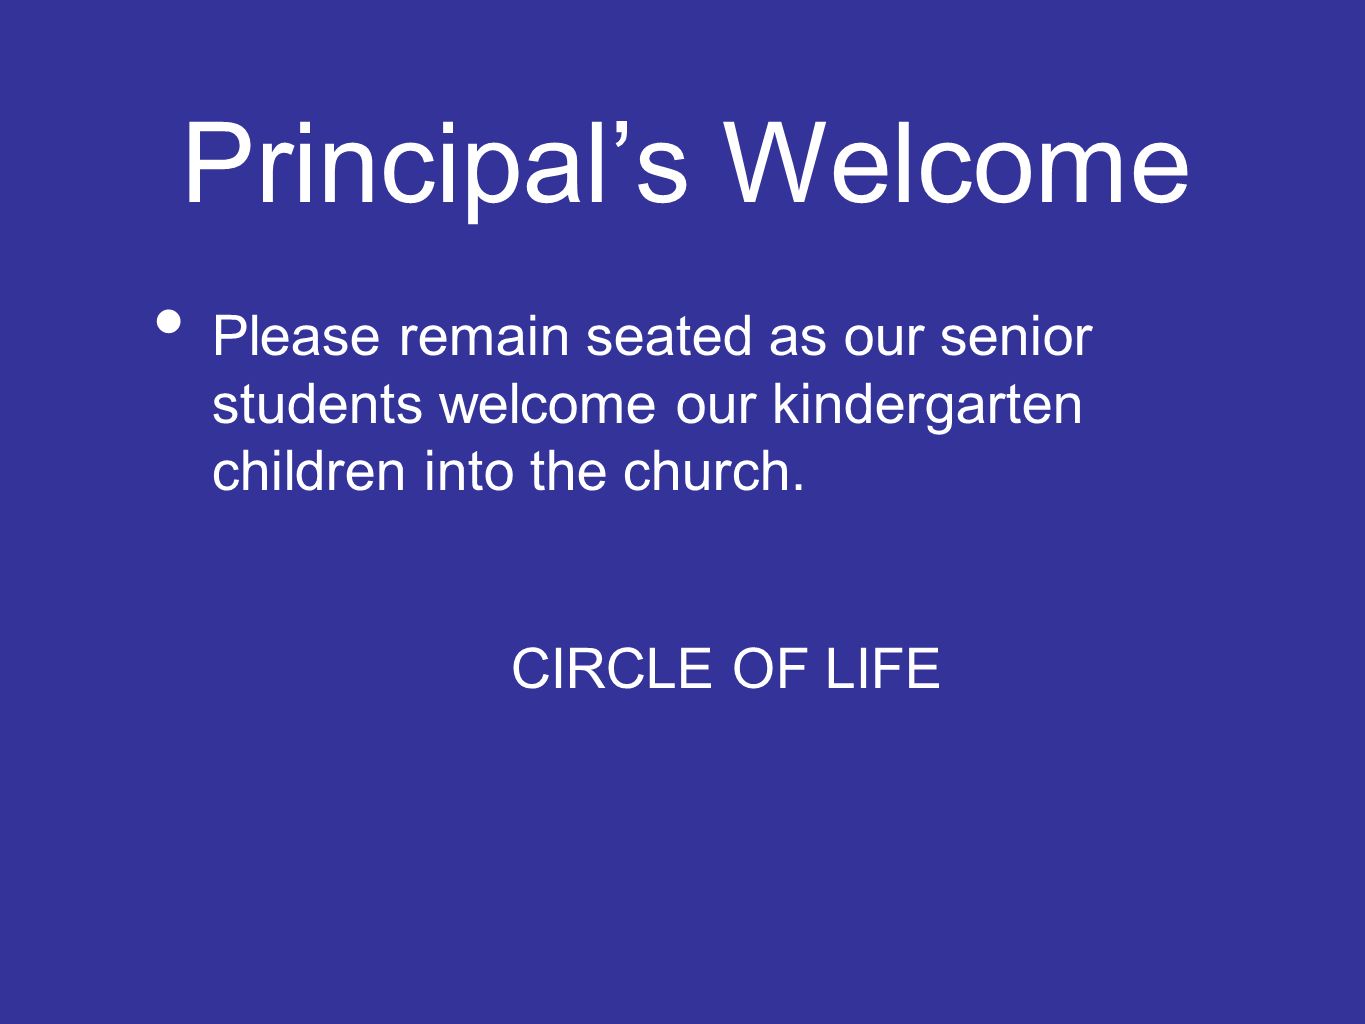 Principal’s Welcome Please remain seated as our senior students welcome our kindergarten children into the church.